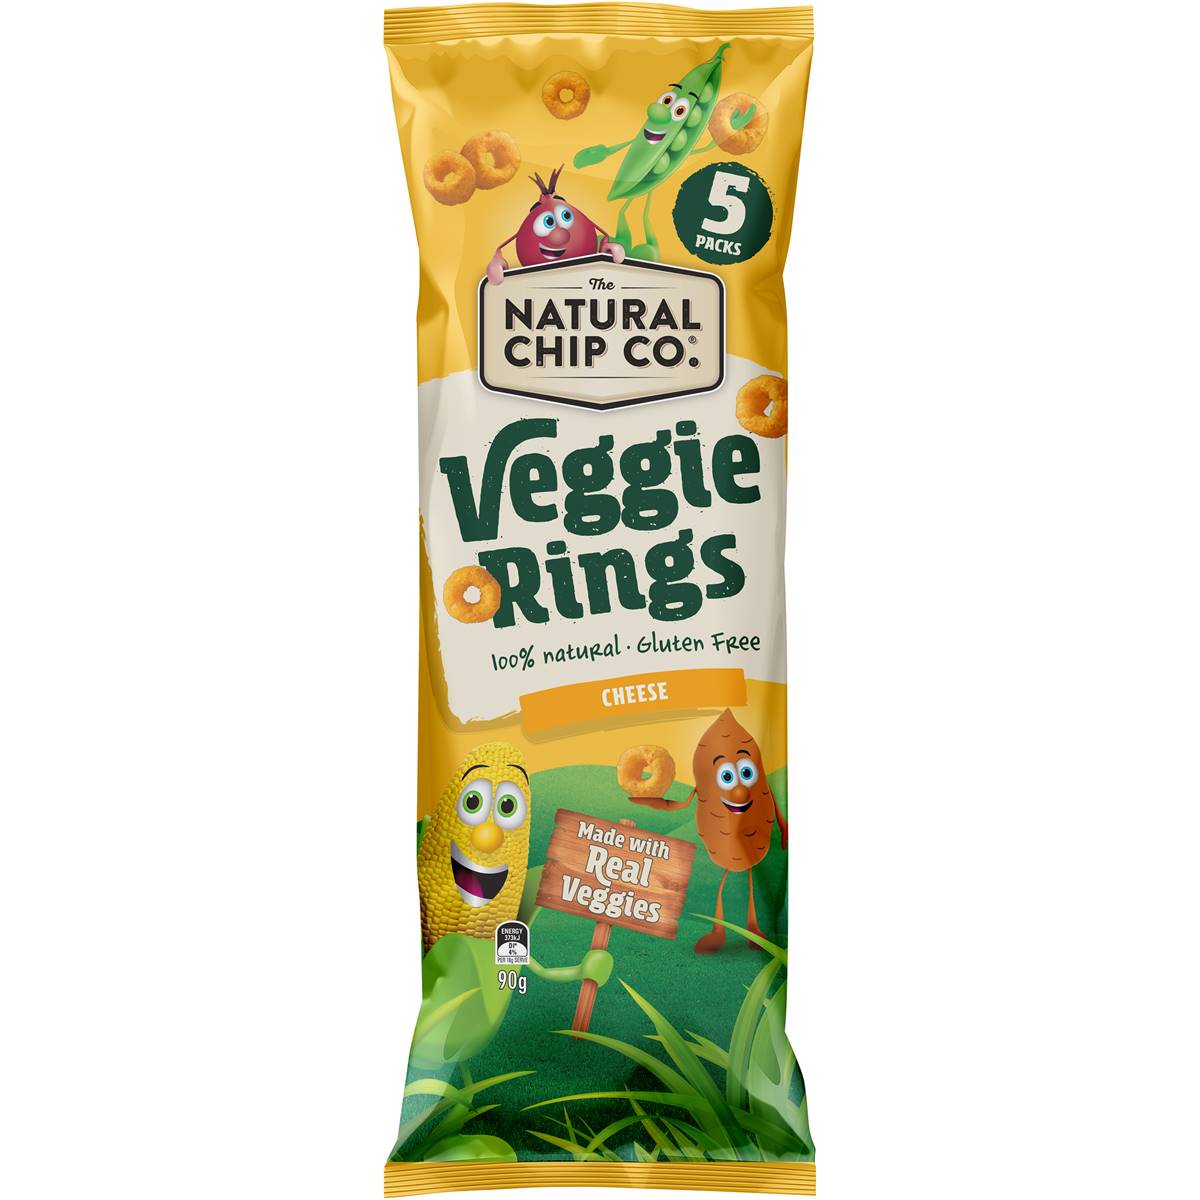 Calories in The Natural Chip Co. Veggie Rings Cheese